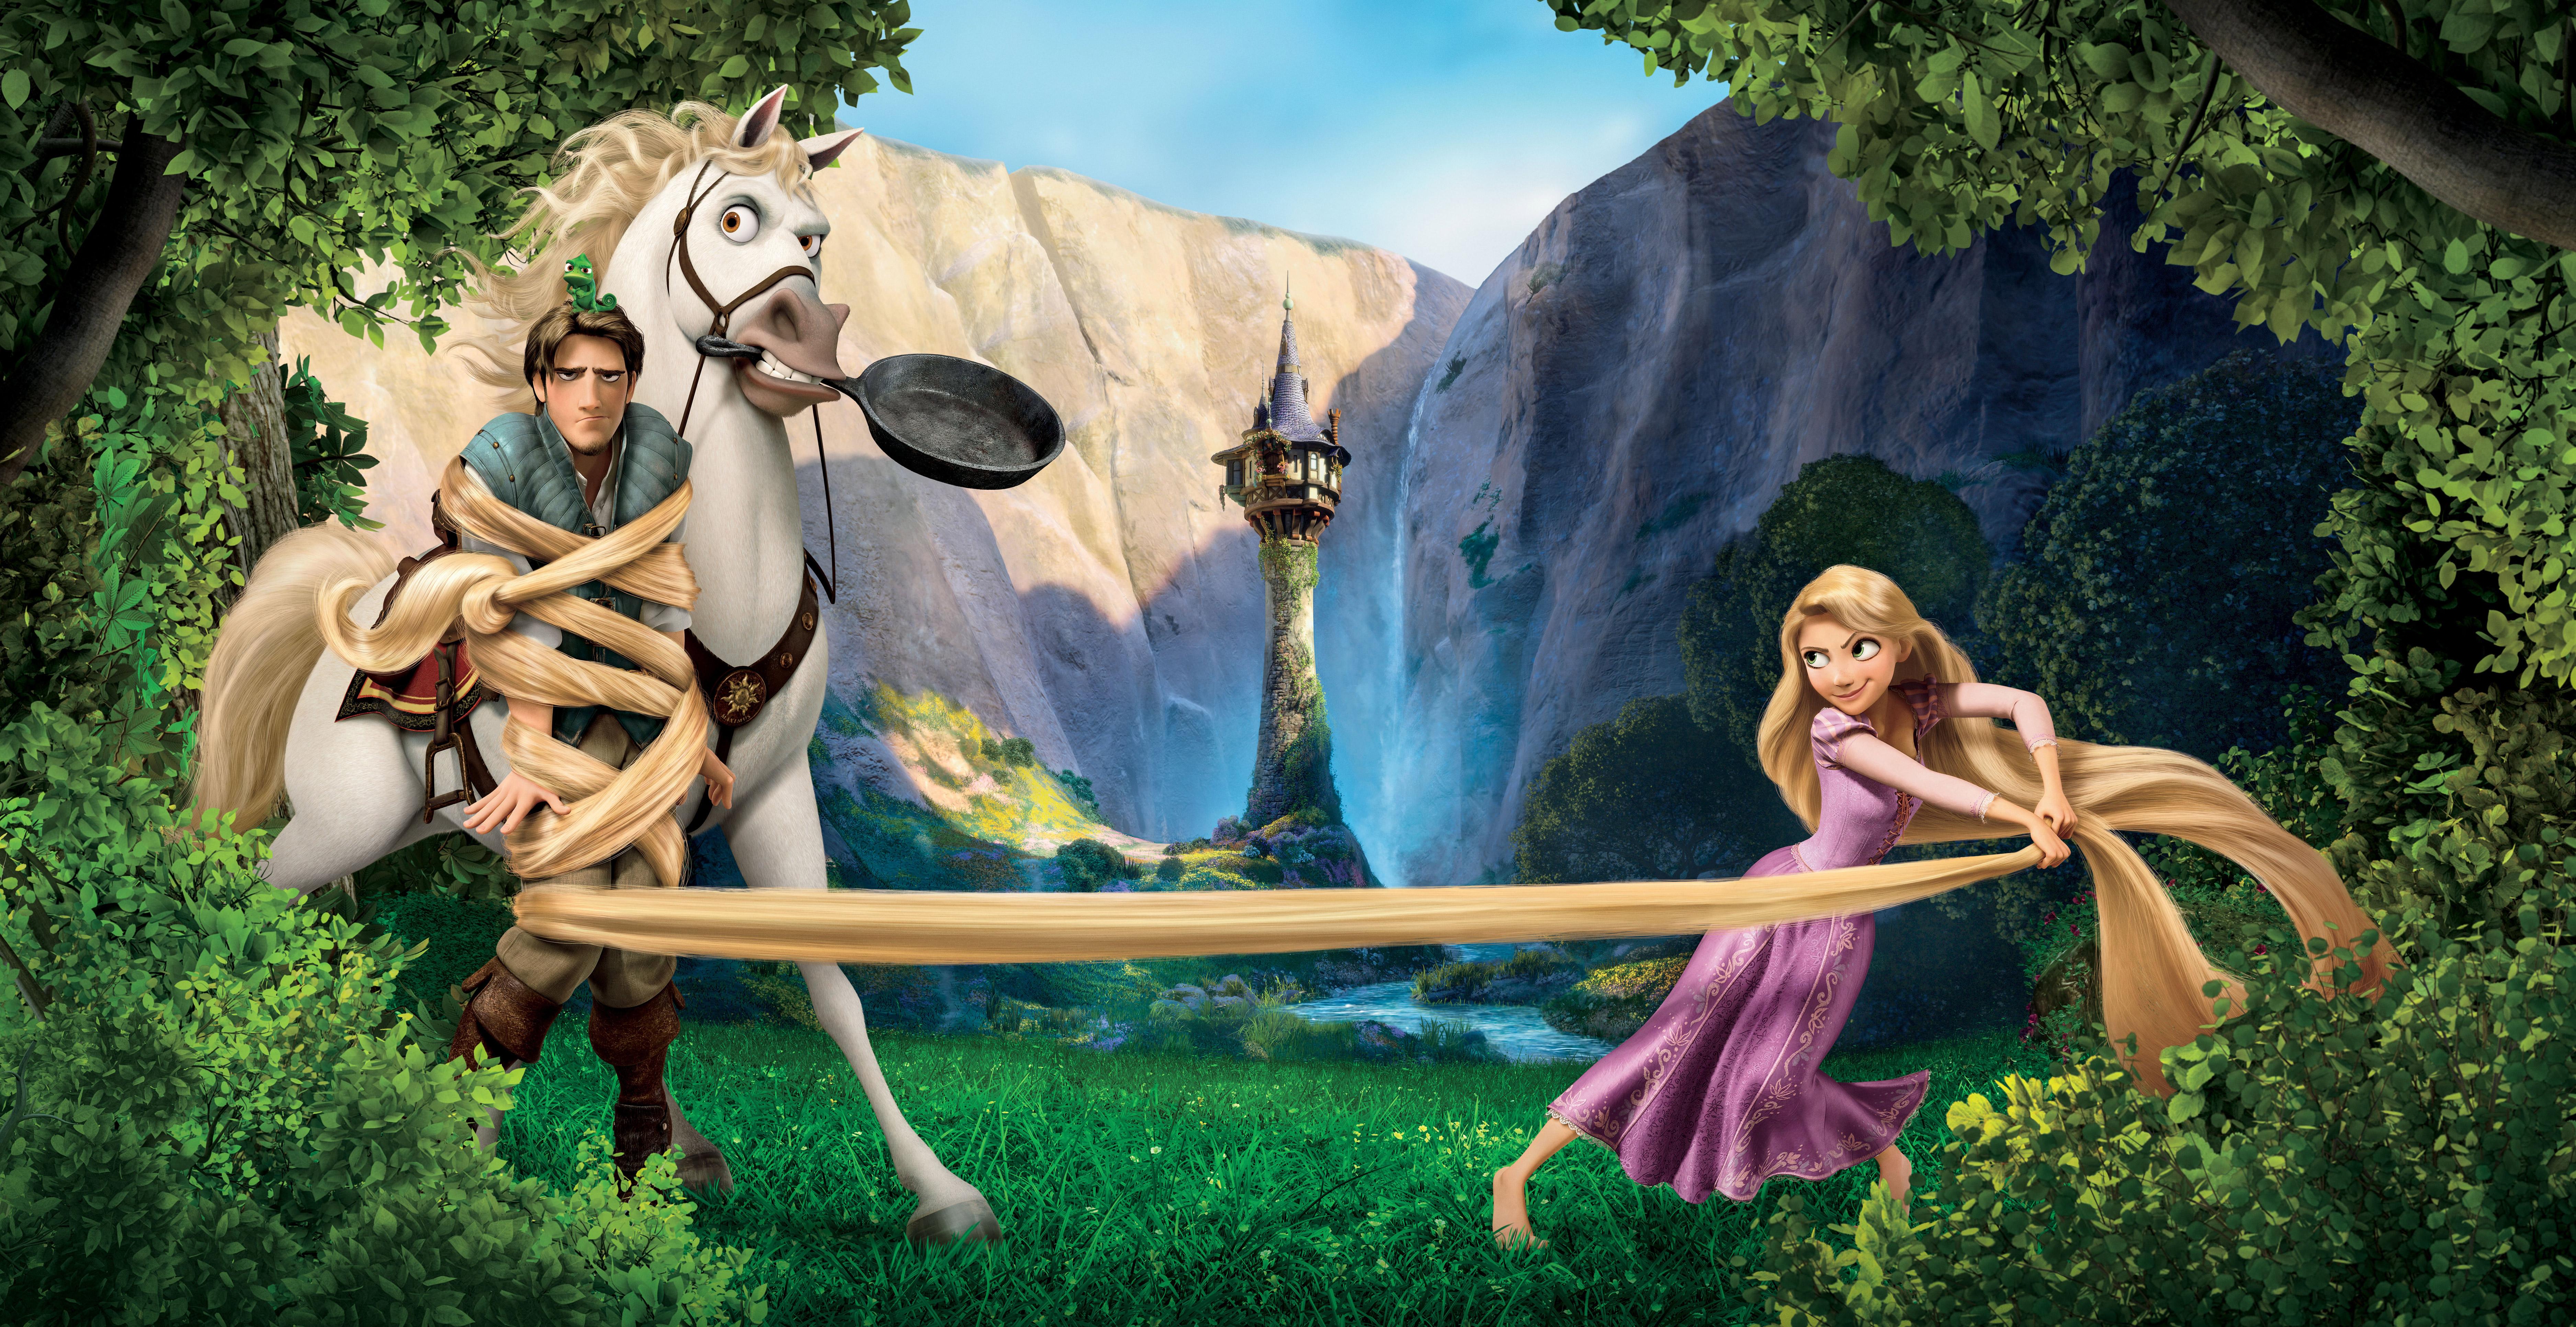 Tangled HD Wallpaper and Background Image